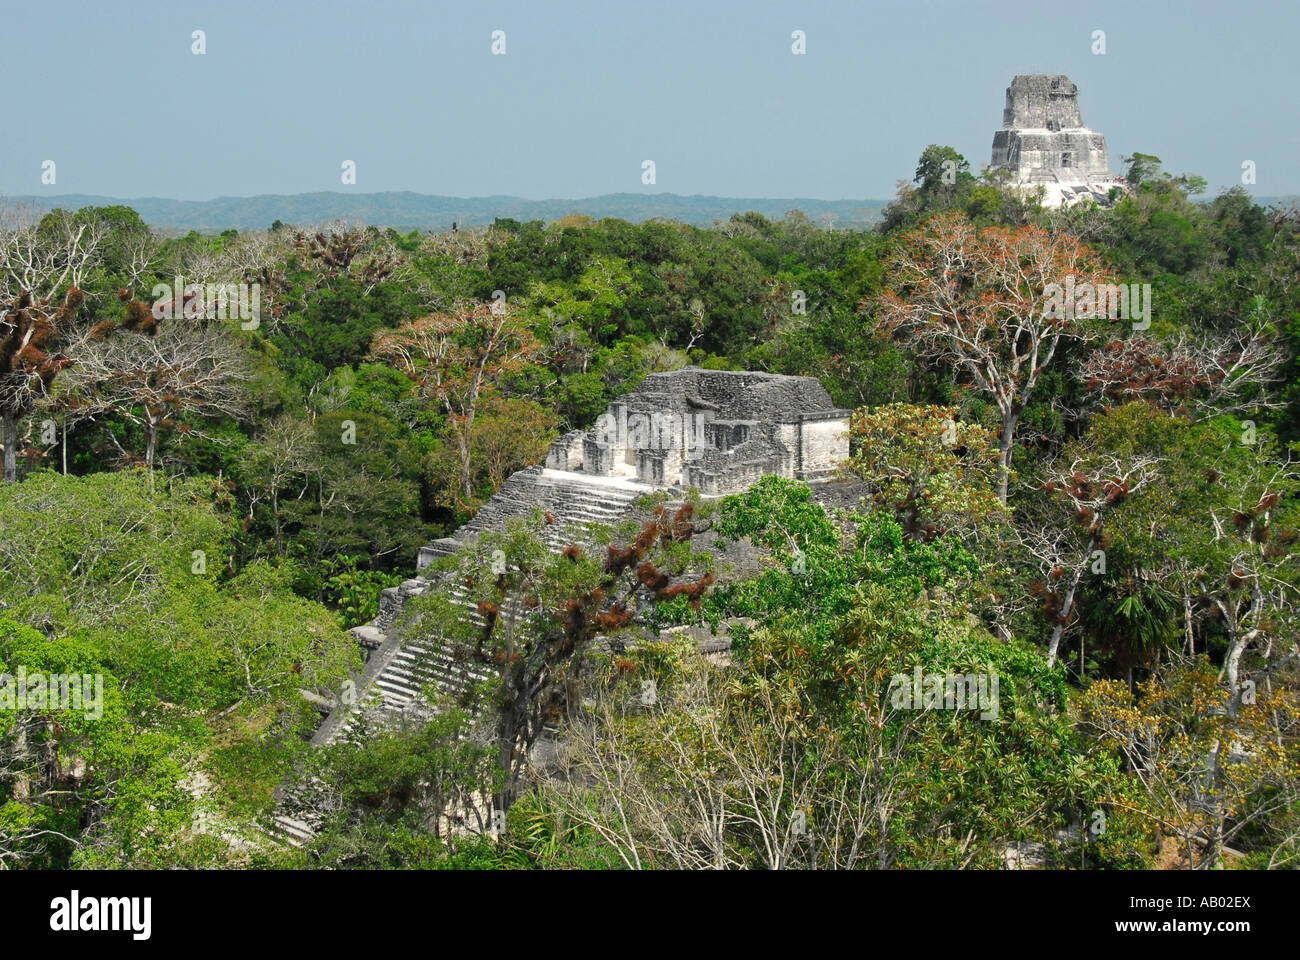 view-of-the-plaza-of-the-lost-world-and-temple-iv-from-top-of-pyramid-AB02EX.jpg